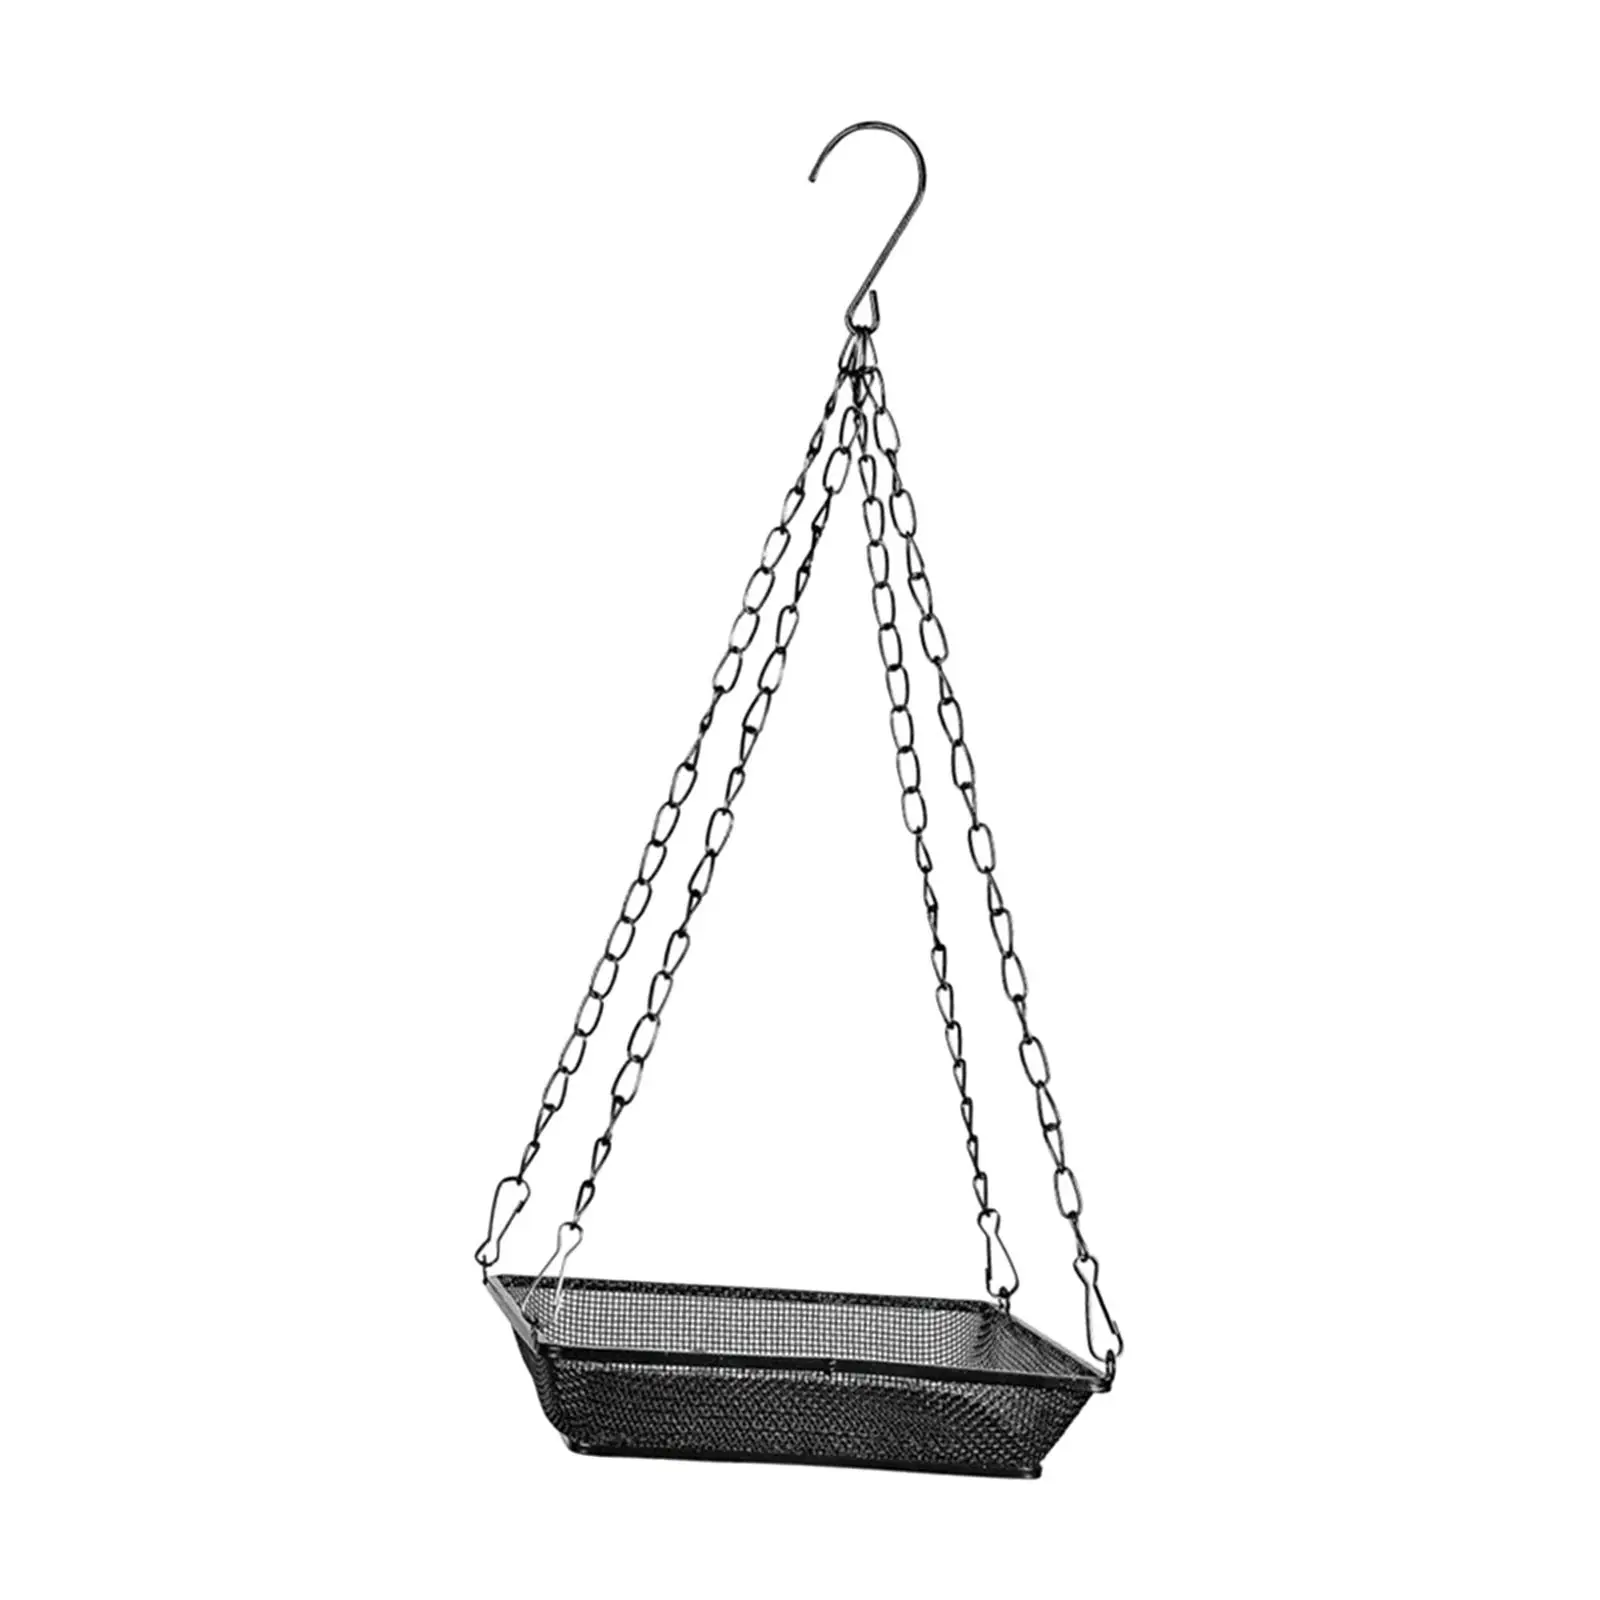 Hanging Bird Feeder Tray Durable Chains Metal Mesh Platform for Outdoors